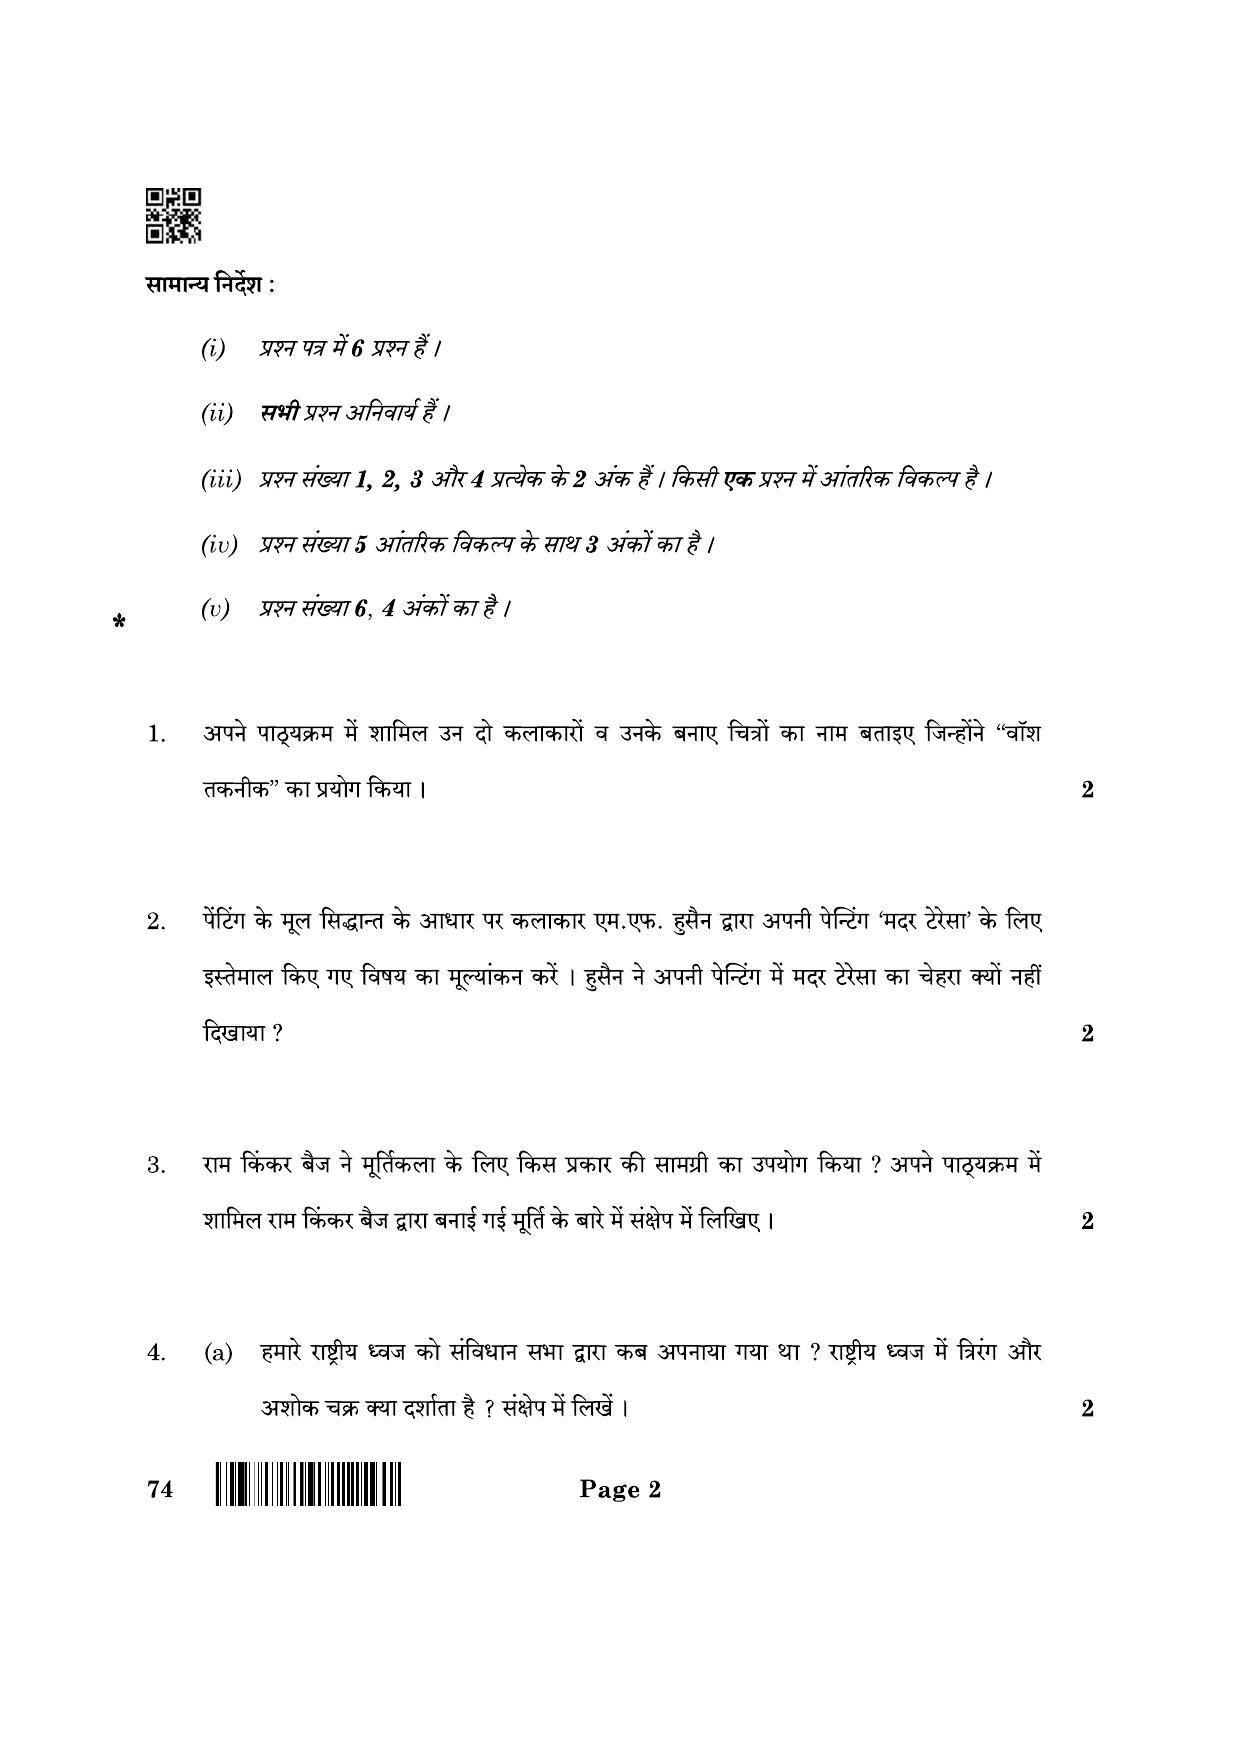 CBSE Class 12 74_Graphics 2022 Question Paper - Page 2